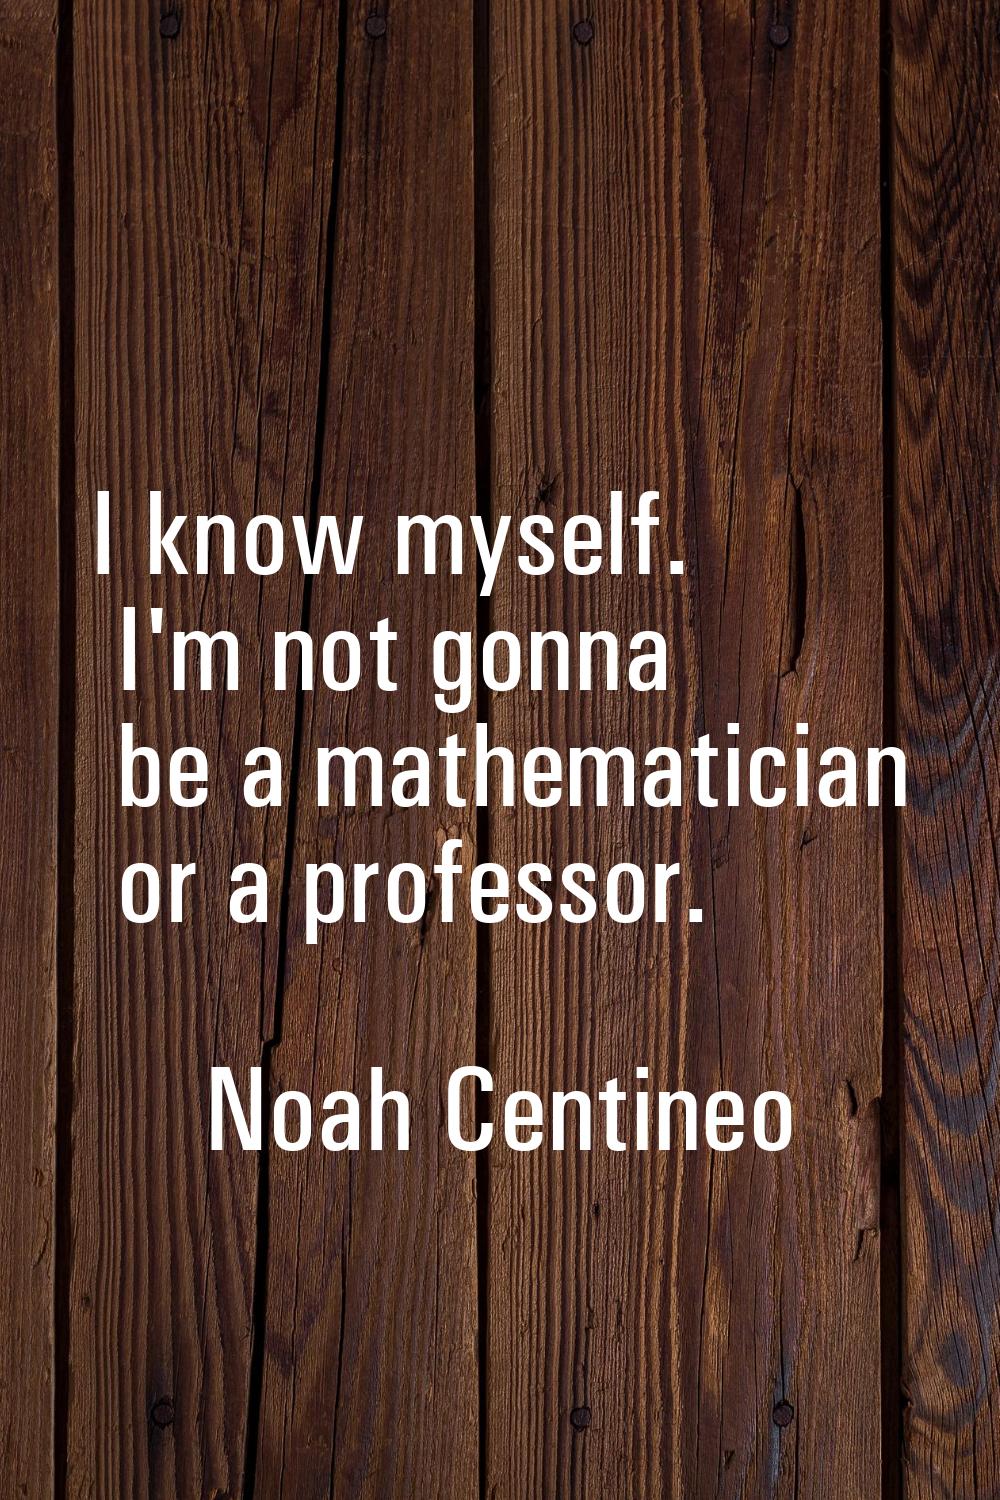 I know myself. I'm not gonna be a mathematician or a professor.